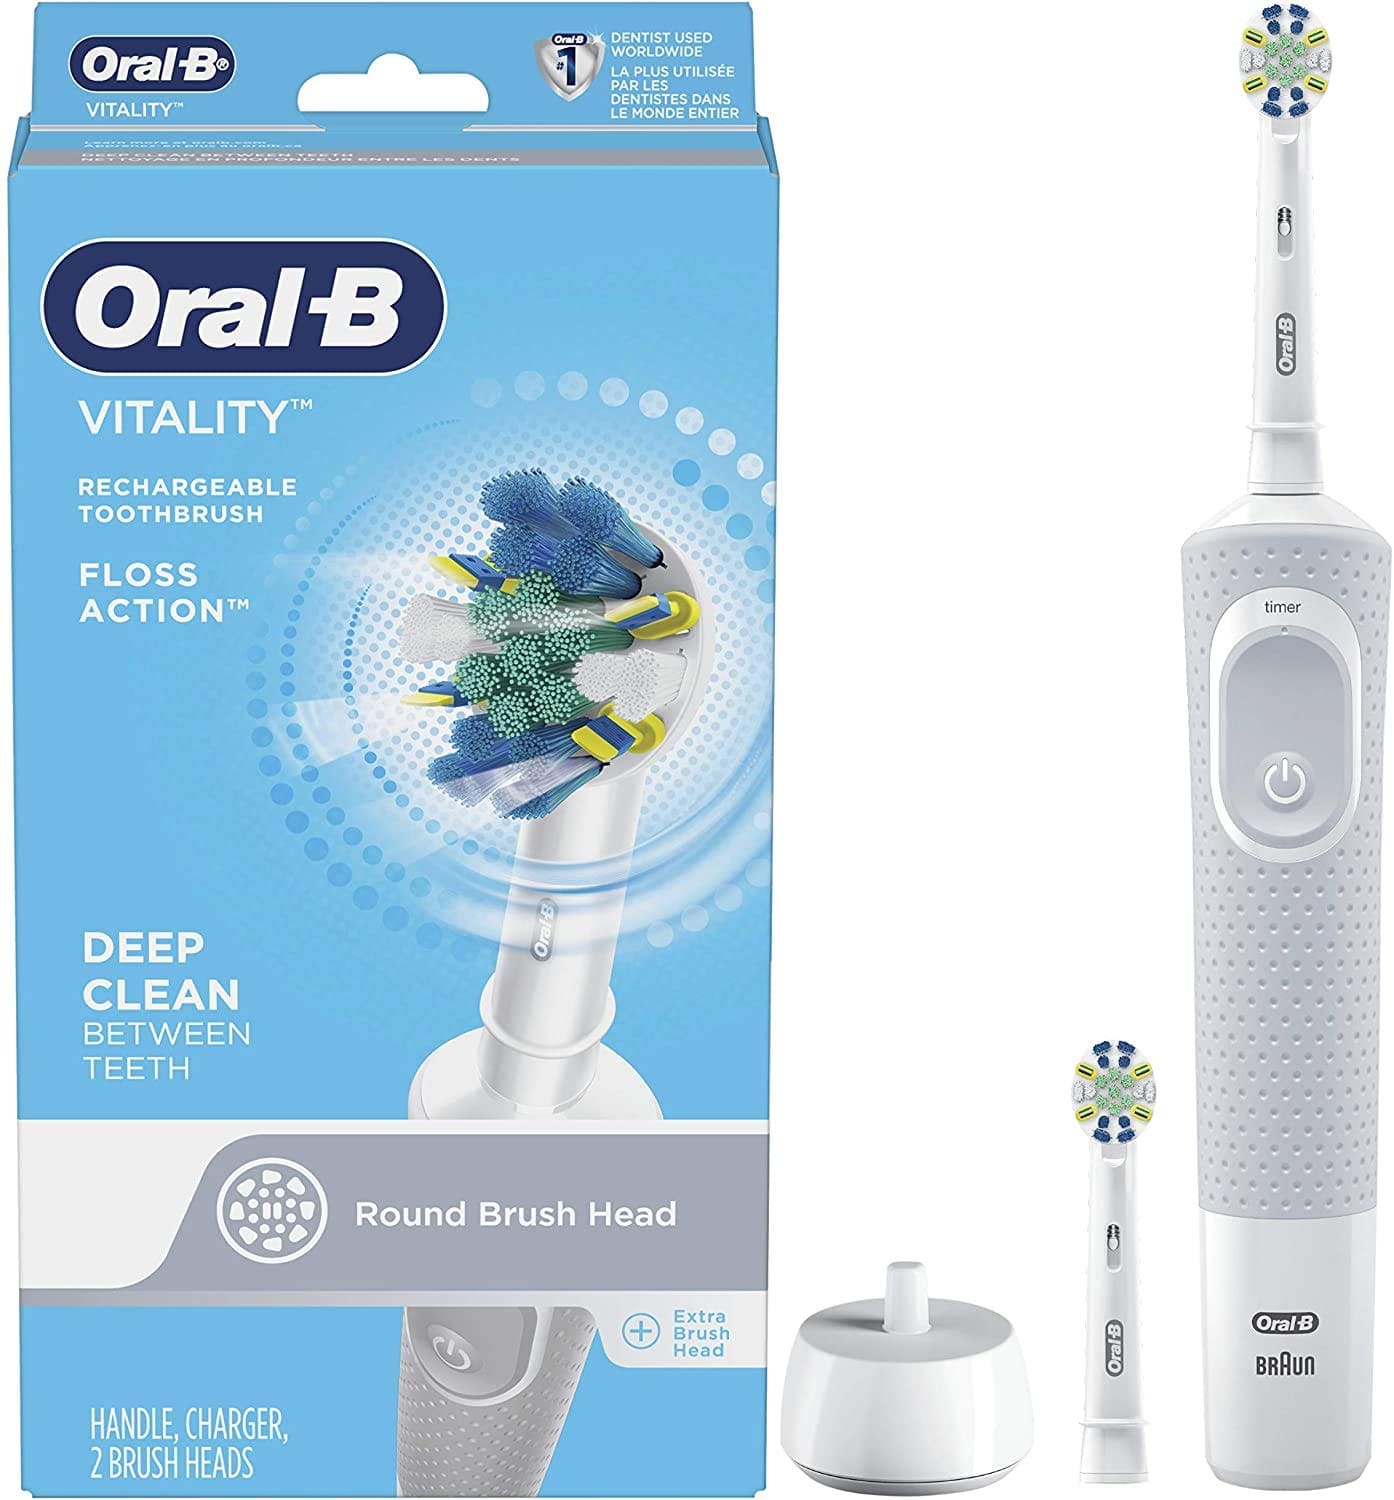 Oral B Vitality Floss Rechargeable Electric Toothbrush